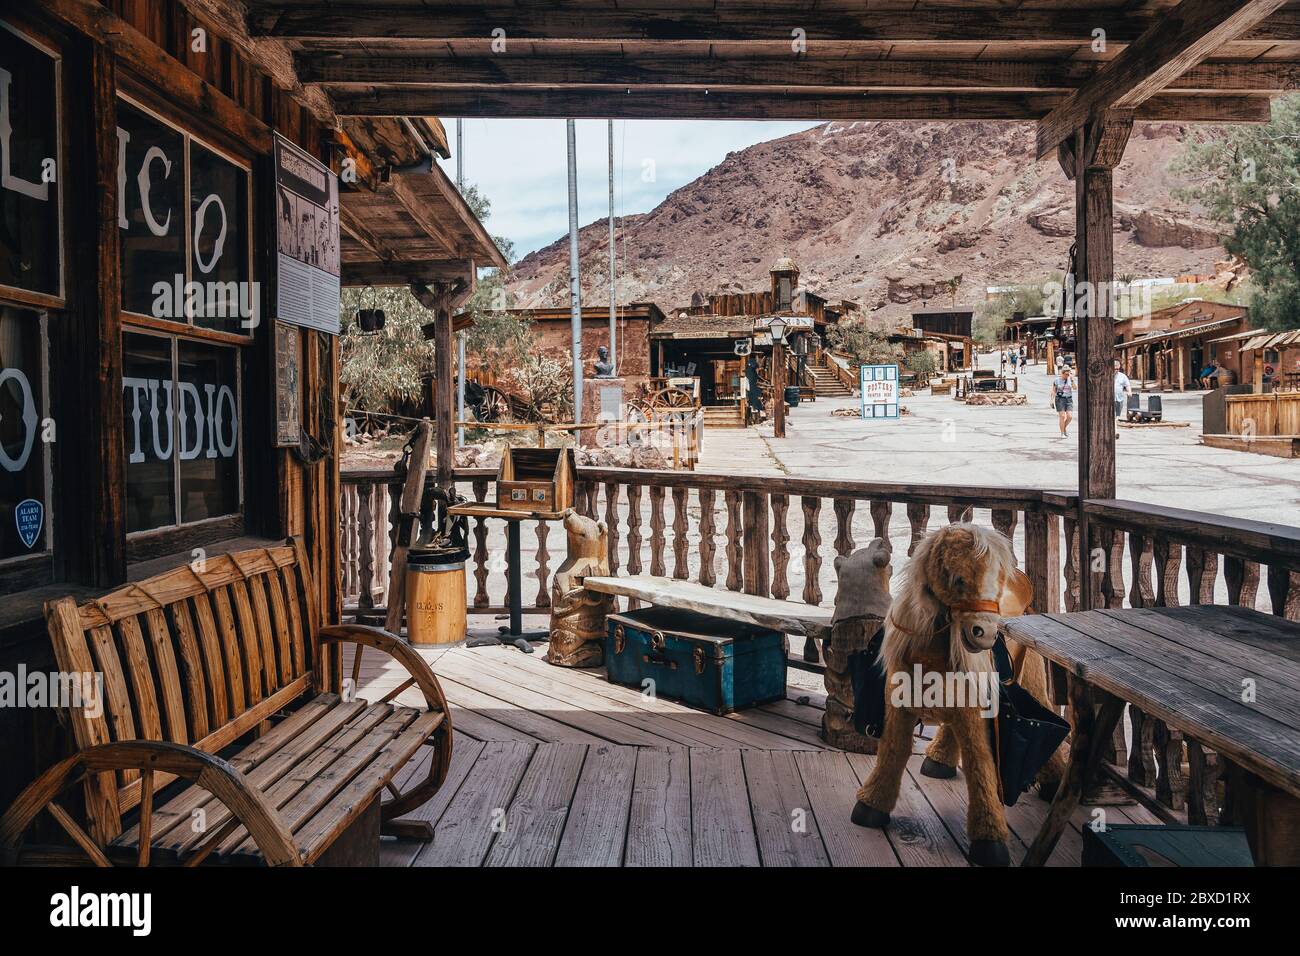 Calico Ghost Town in California Stock Photo